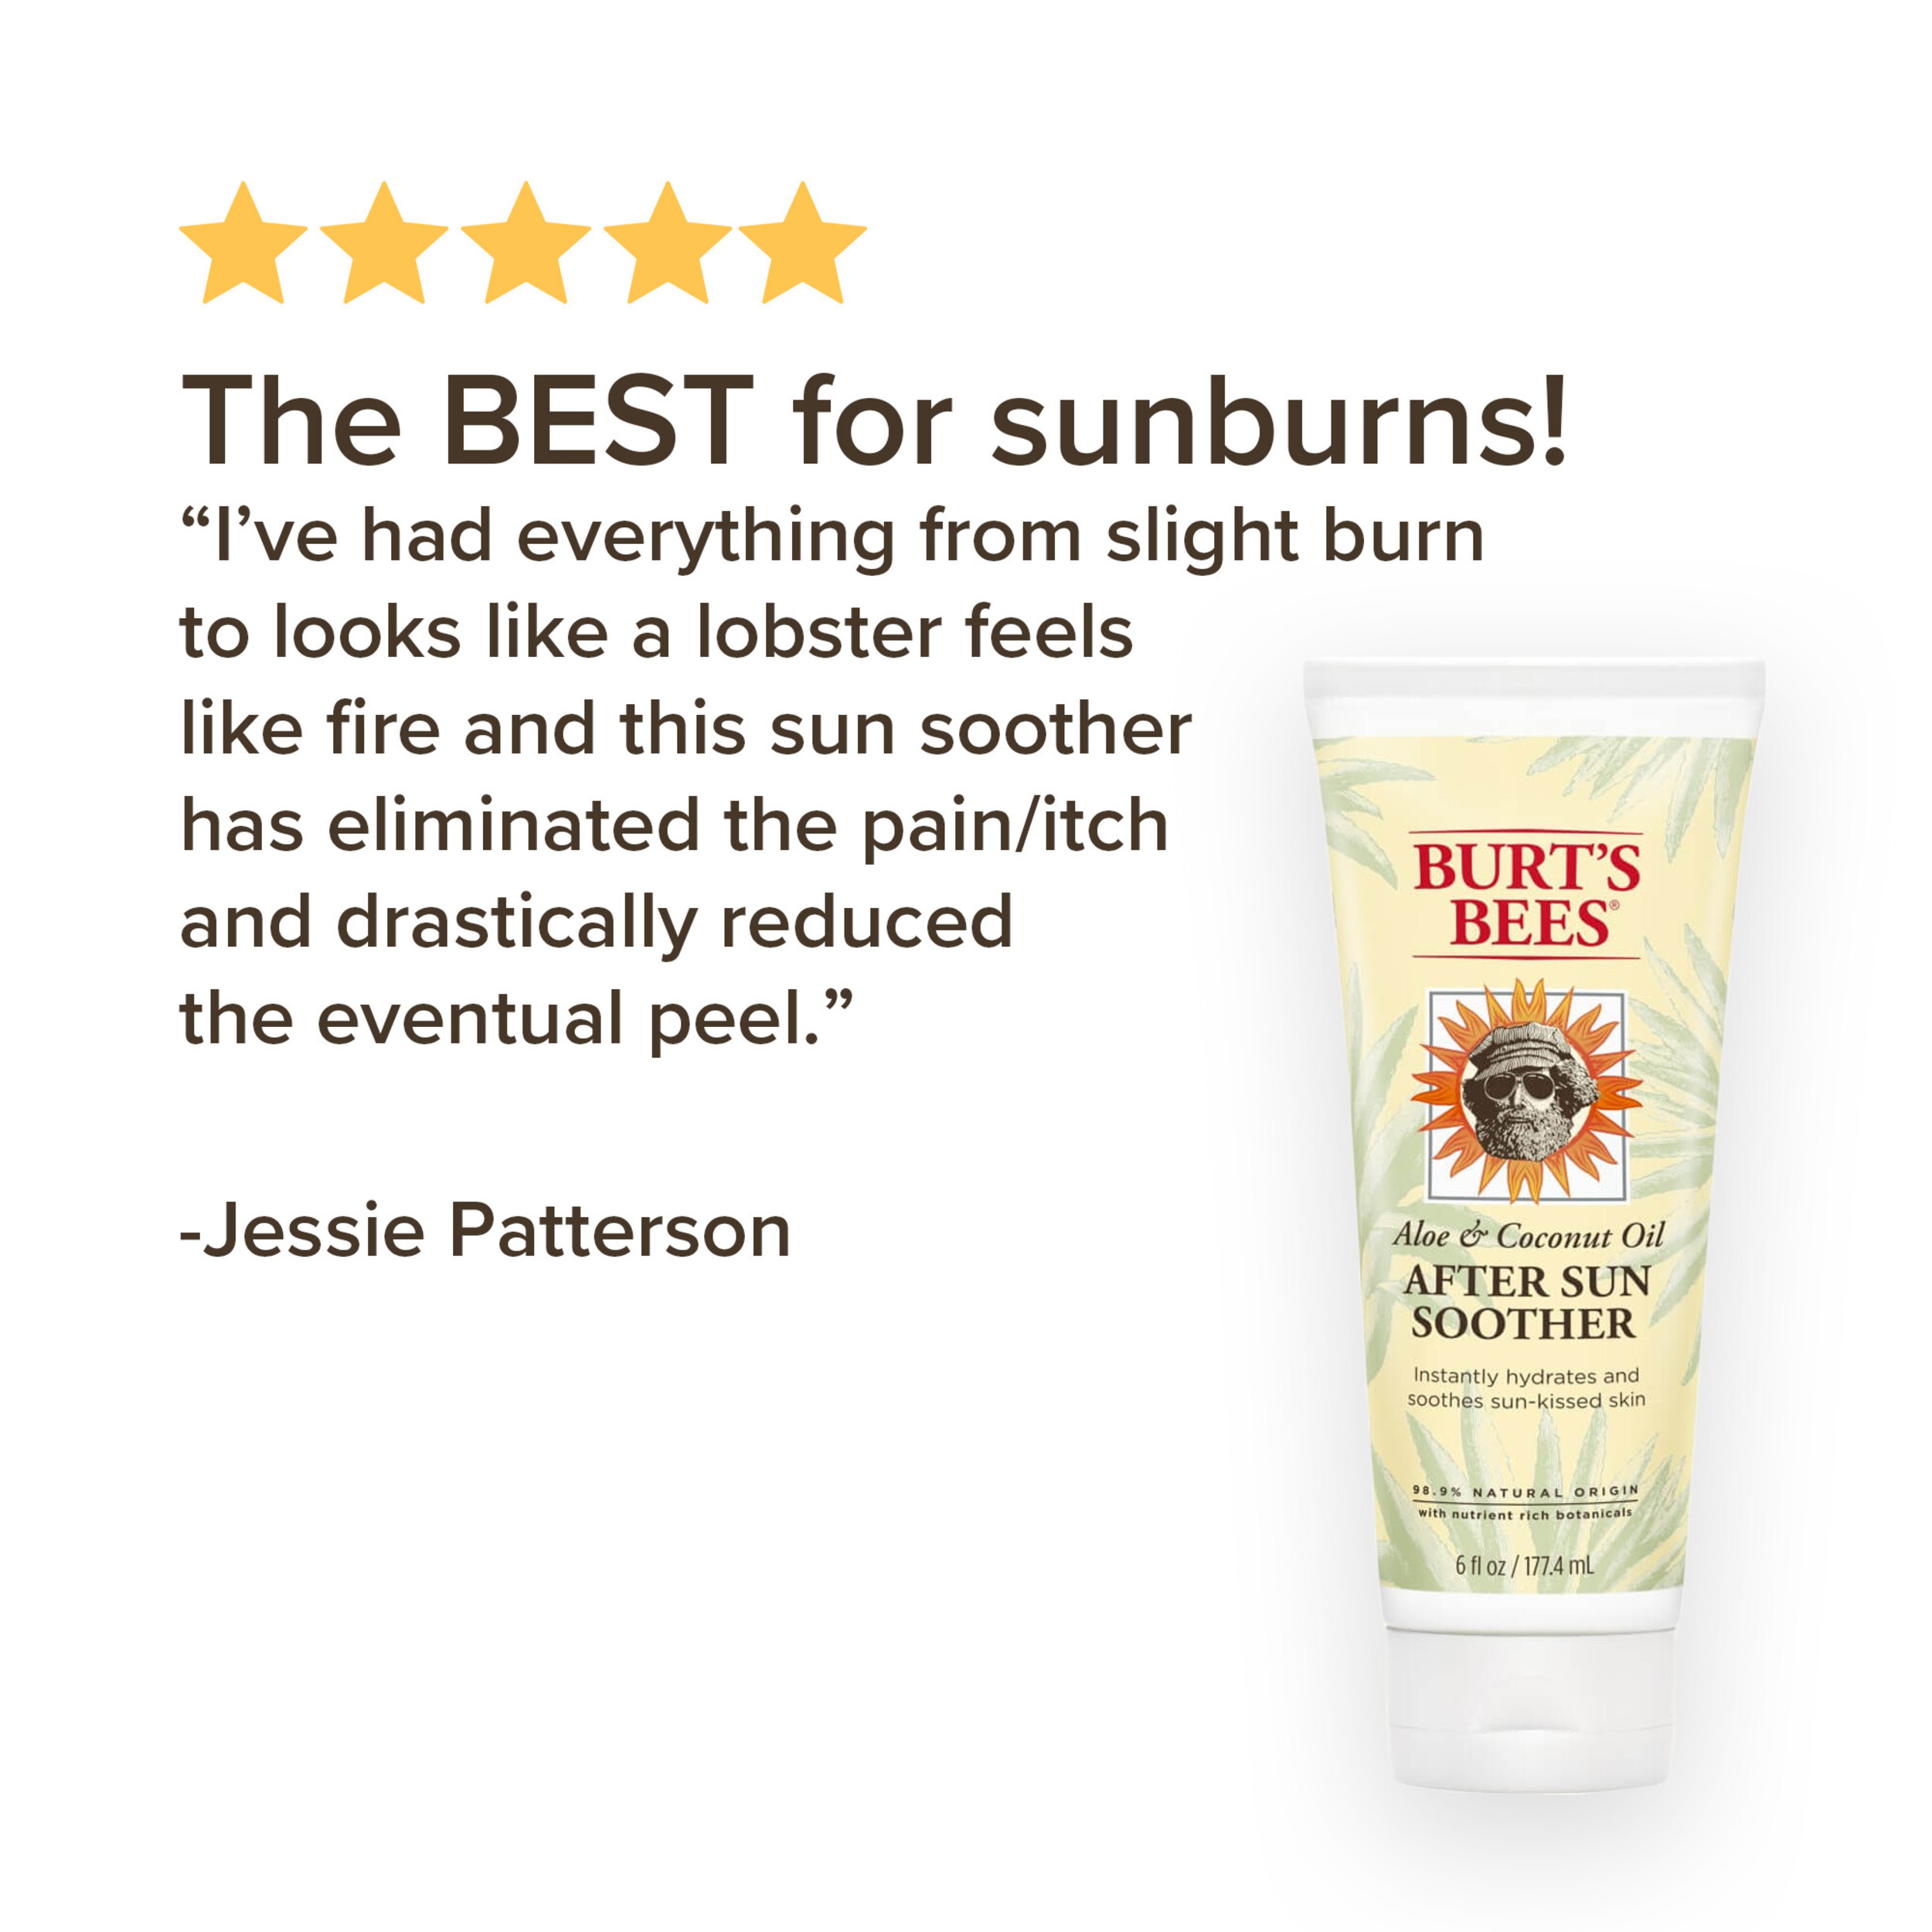 Burt's Bees Aloe & Coconut Oil After-Sun Soother, 6 Oz - image 2 of 10